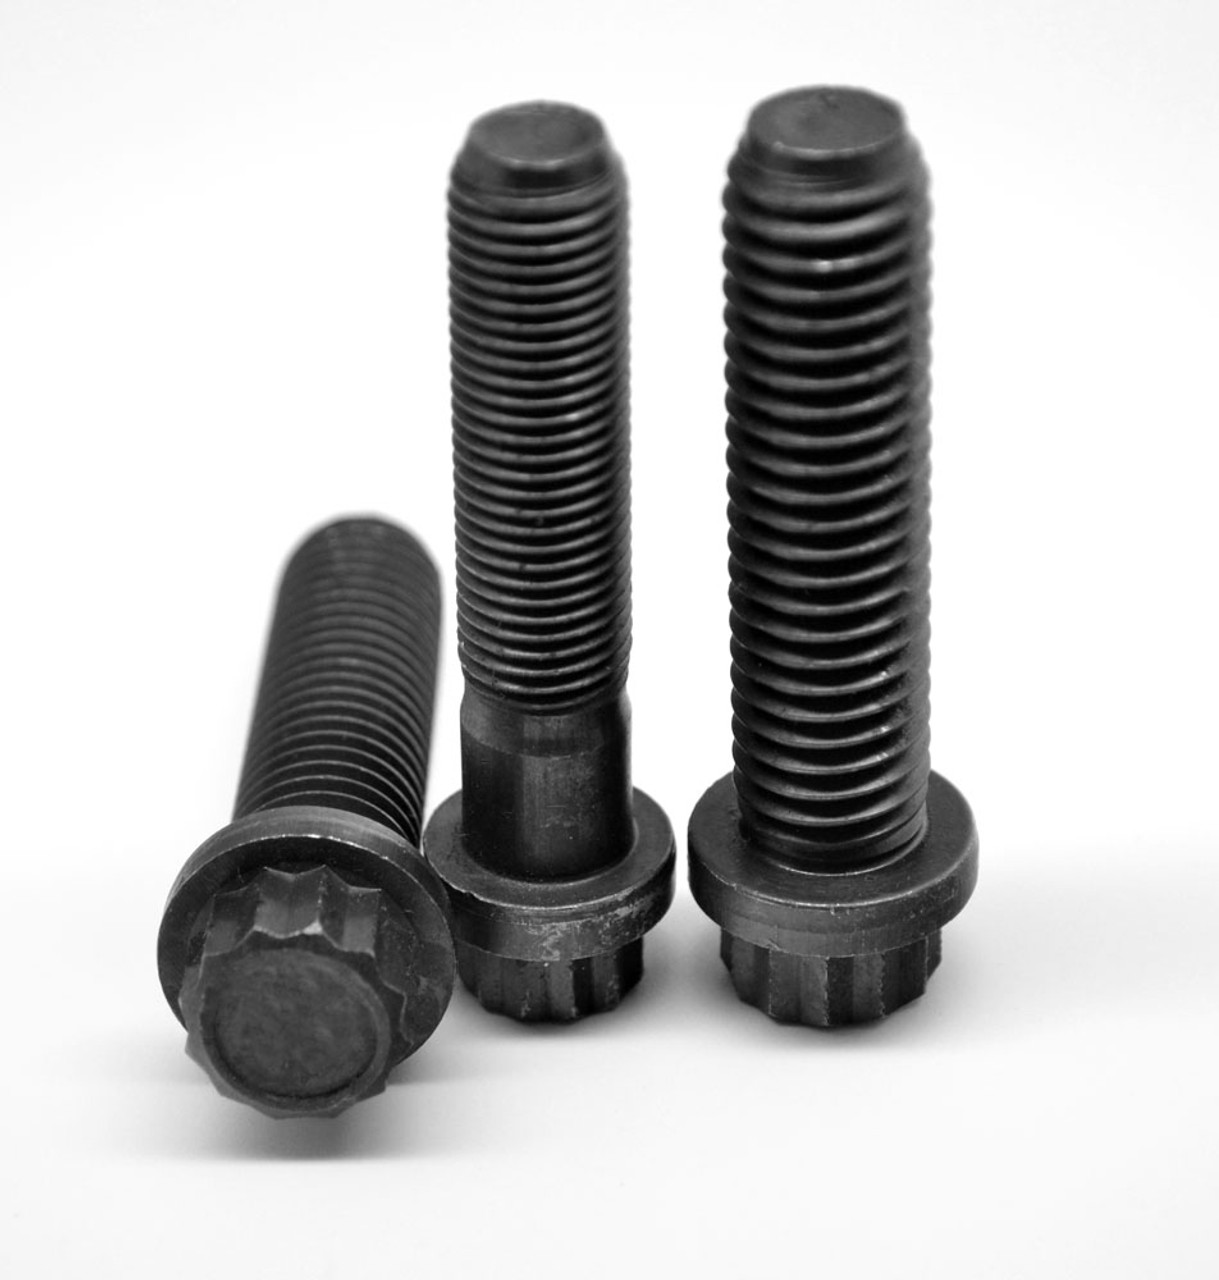 1-8 x 6 Coarse Thread 12-Point Flange Screw Alloy Steel Thermal Black Oxide